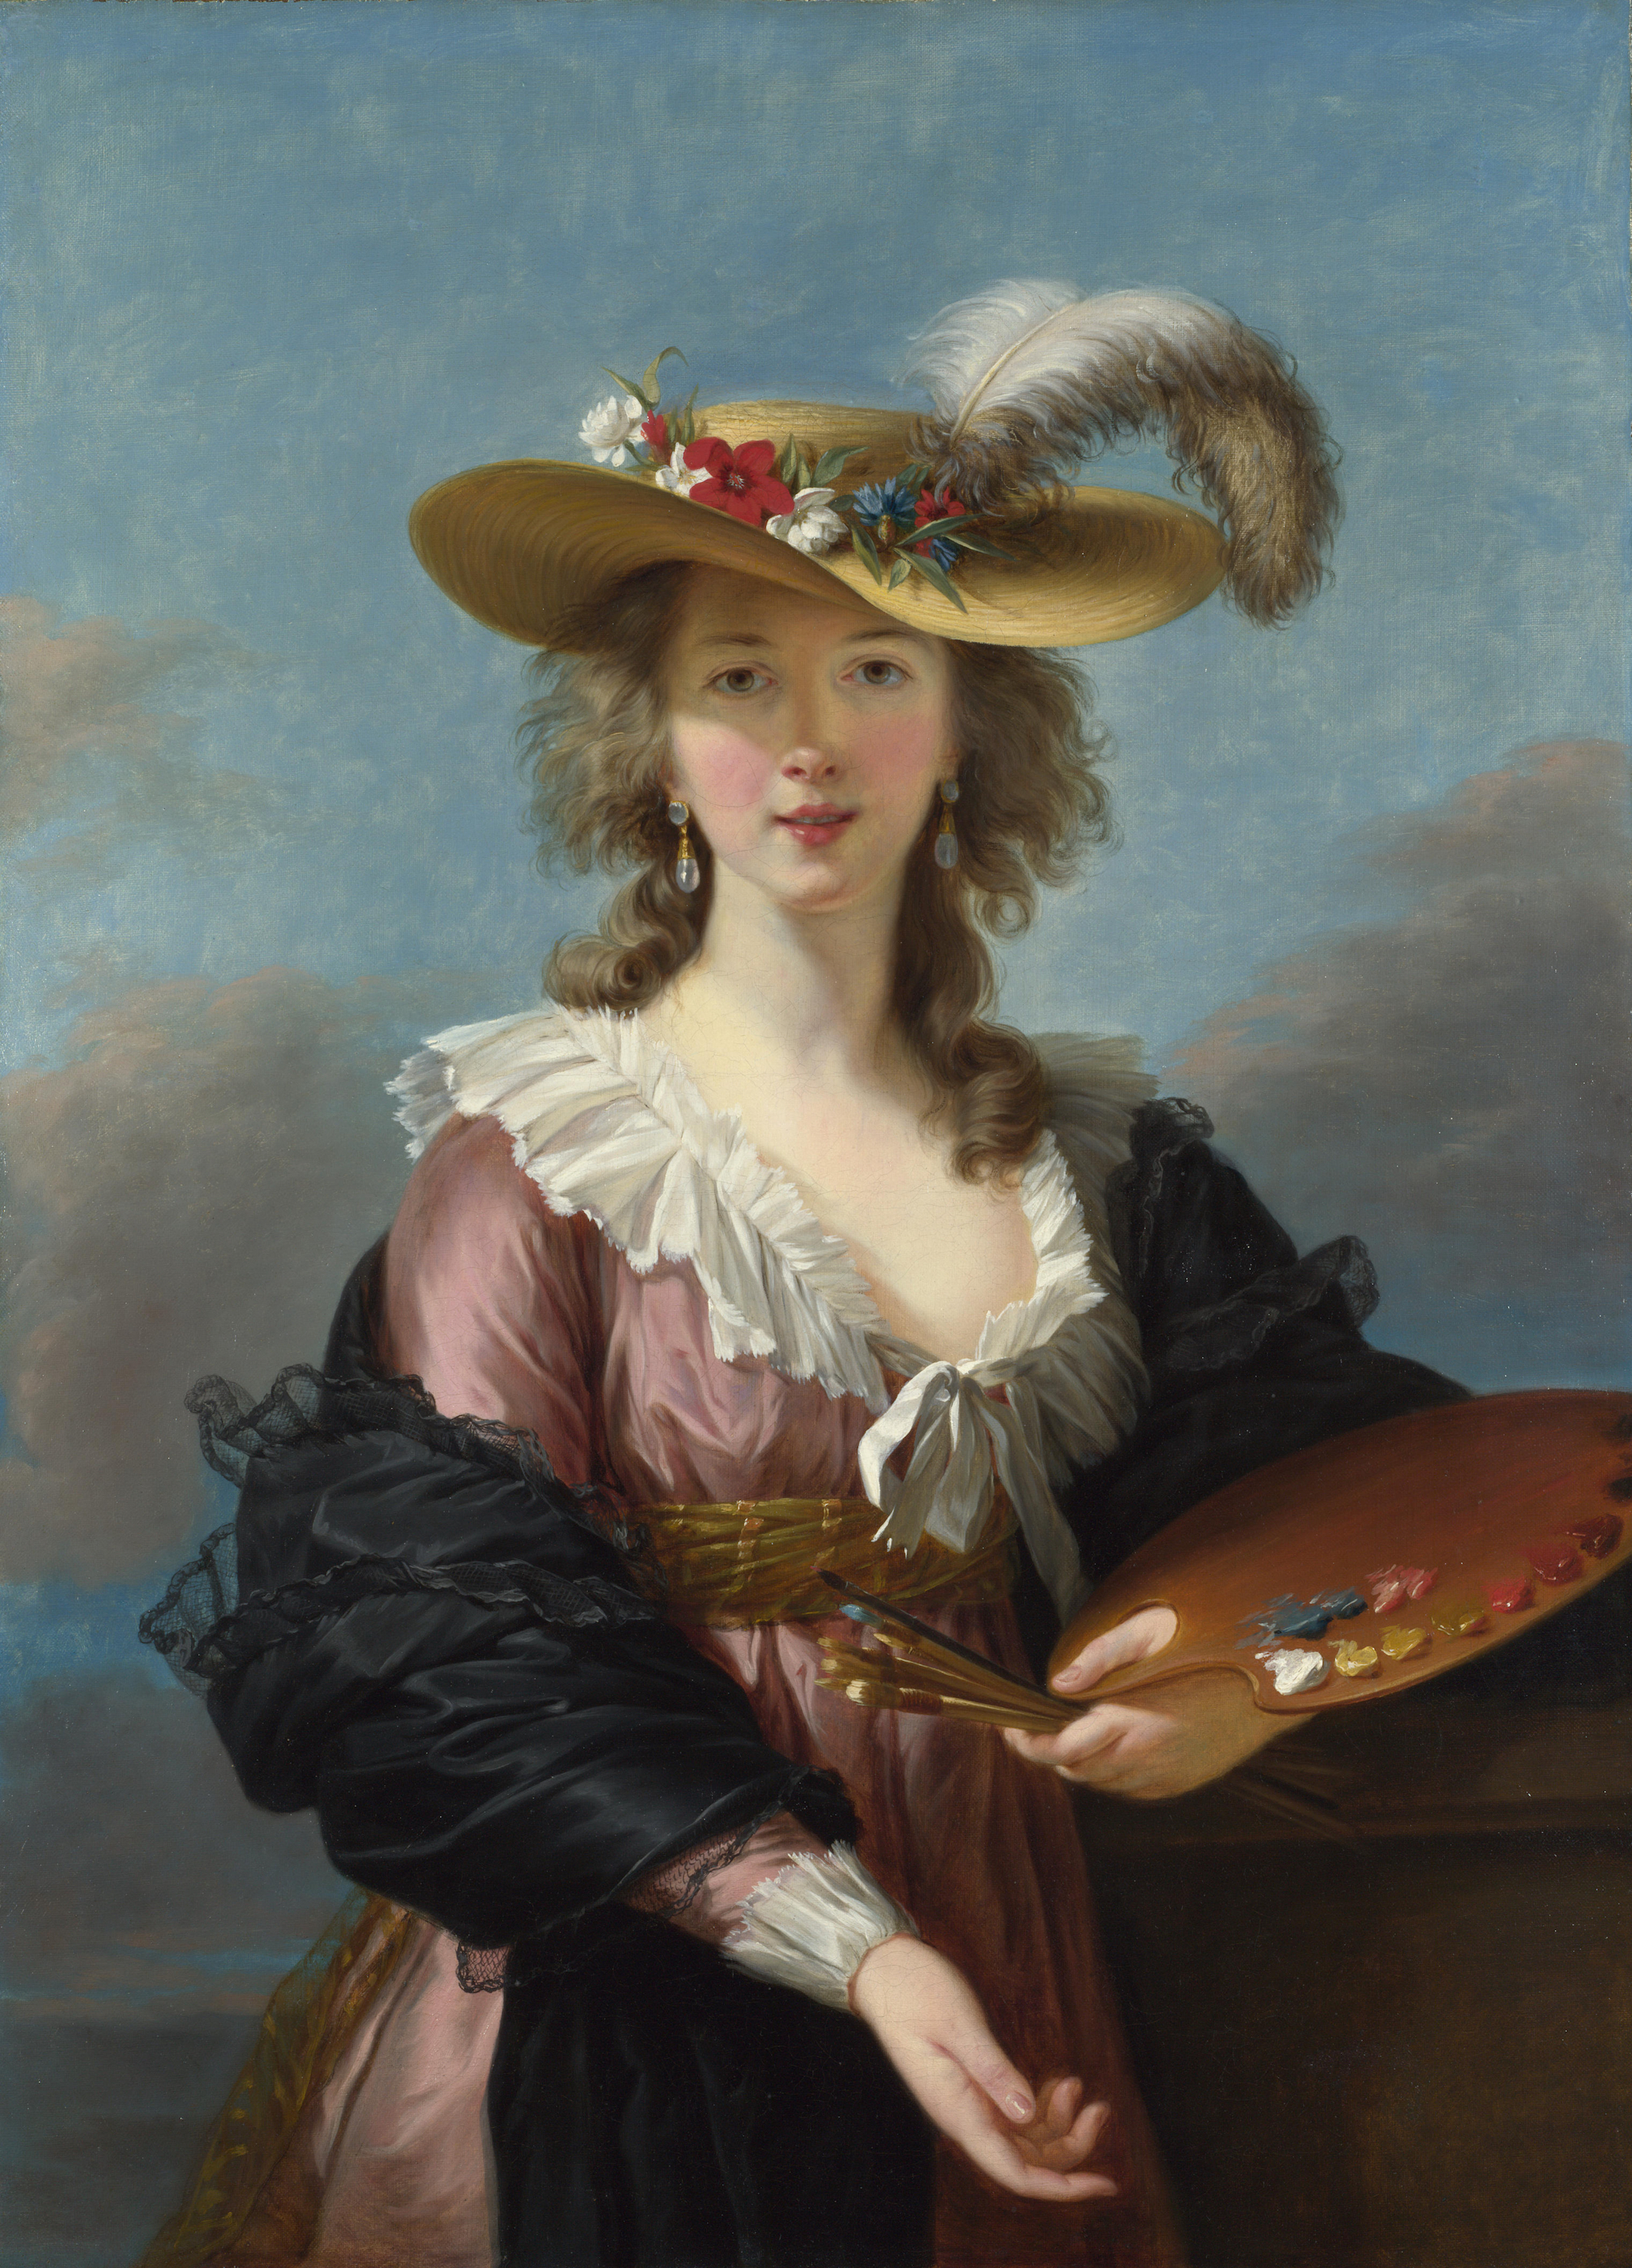 Self Portrait in a Straw Hat by Élisabeth Vigee Le Brun - after 1782 - 97.8 x 70.5 cm private collection